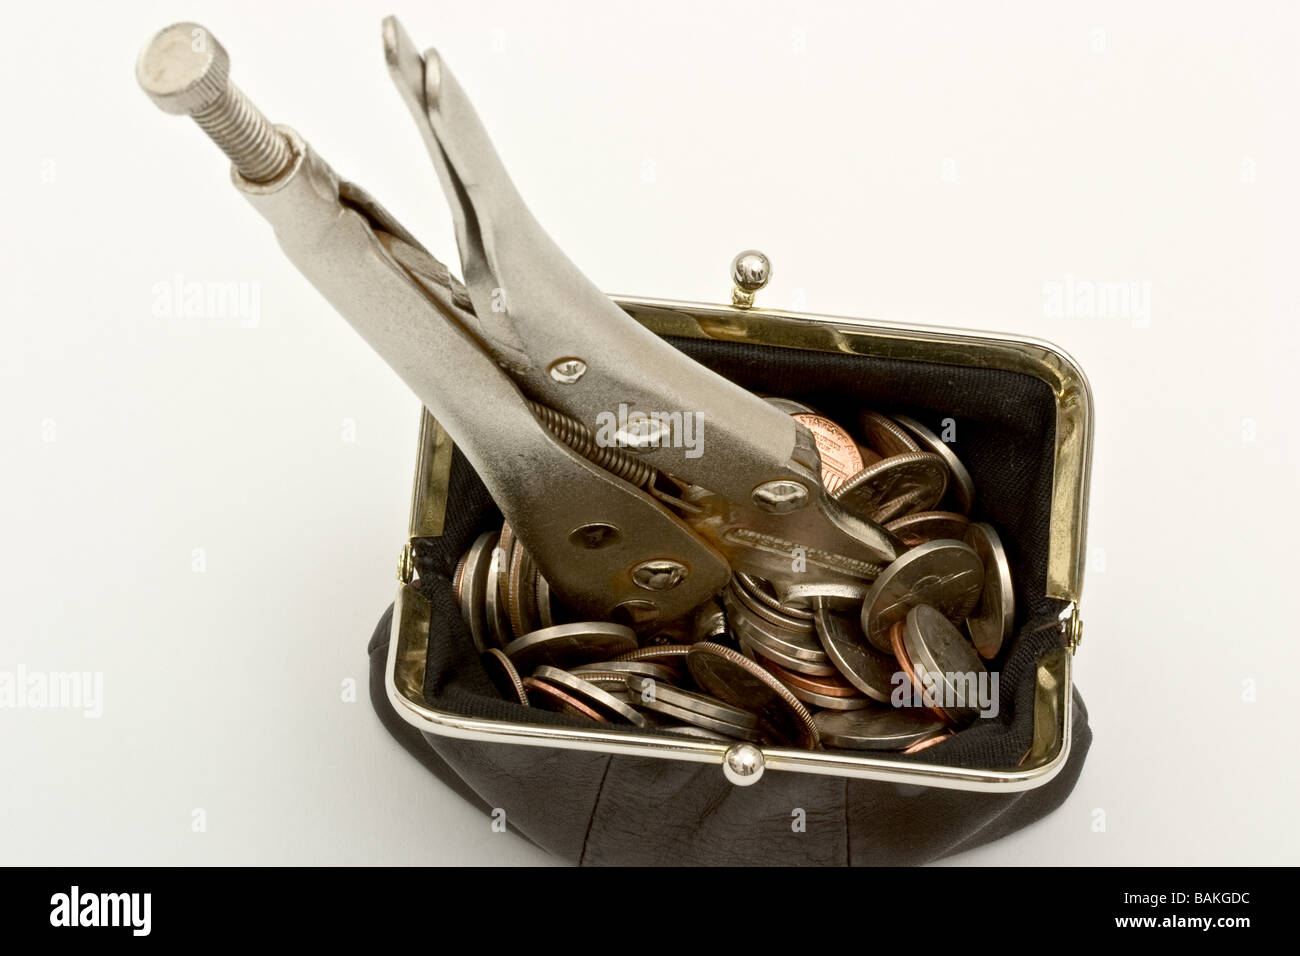 Adjustable wrench in a leather purse filled with coins Stock Photo